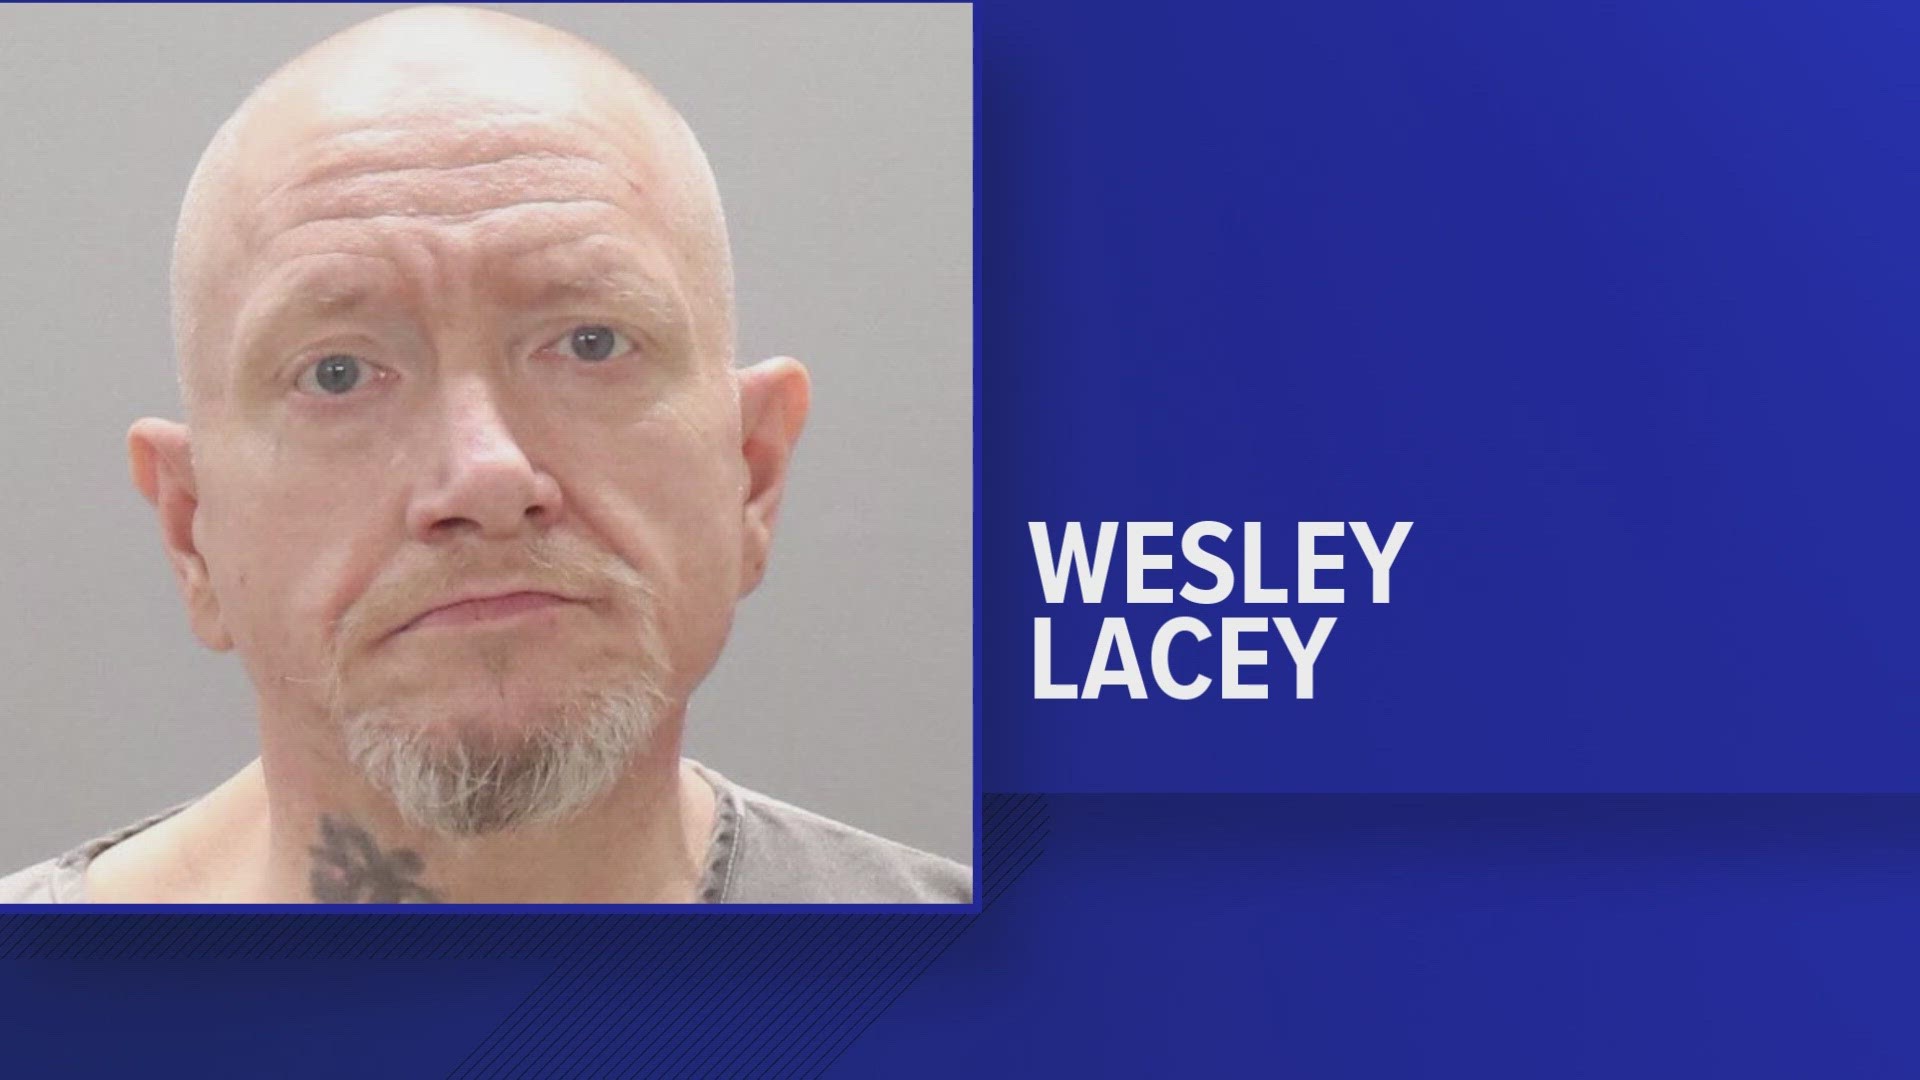 According to the Knox County District Attorney's Office, the man who purchased the drugs from another dealer was aware of overdoses connected to that dealer.